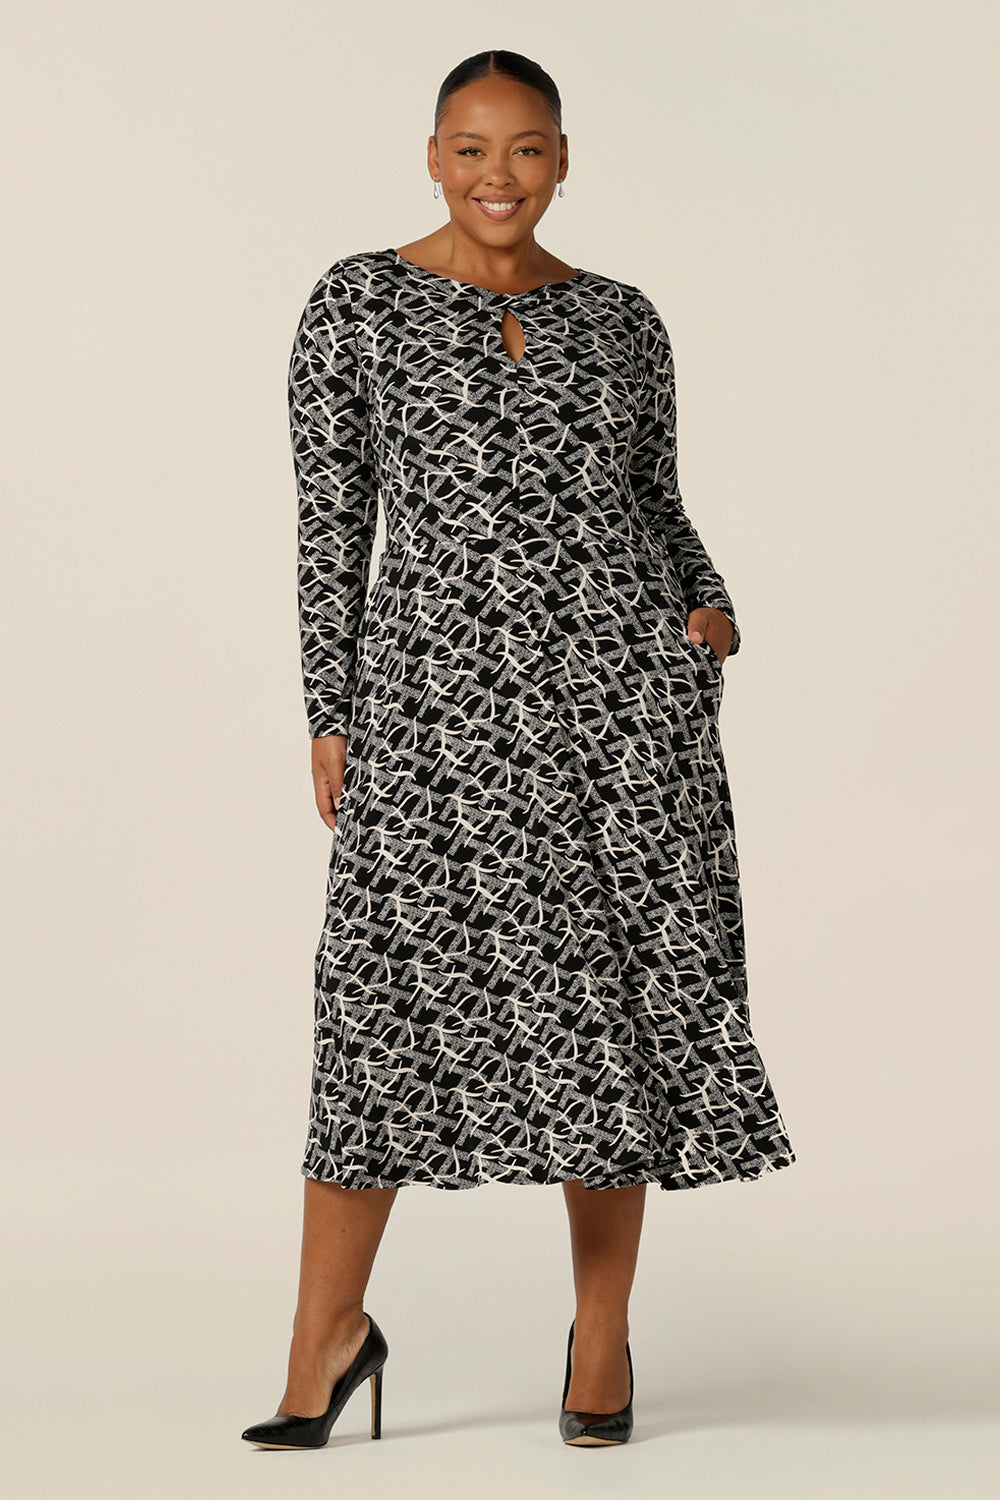 A good dress for plus size, fuller figure women, the Sandee Dress by Australian and New Zealand women's clothing label L&F is well-fitting in a black and white print, stretchy jersey fabric. A midi length, long sleeve dress with twisted keyhole detail, this is an Australian-made work dress available to buy in an inclusive size range of 8 to 24.